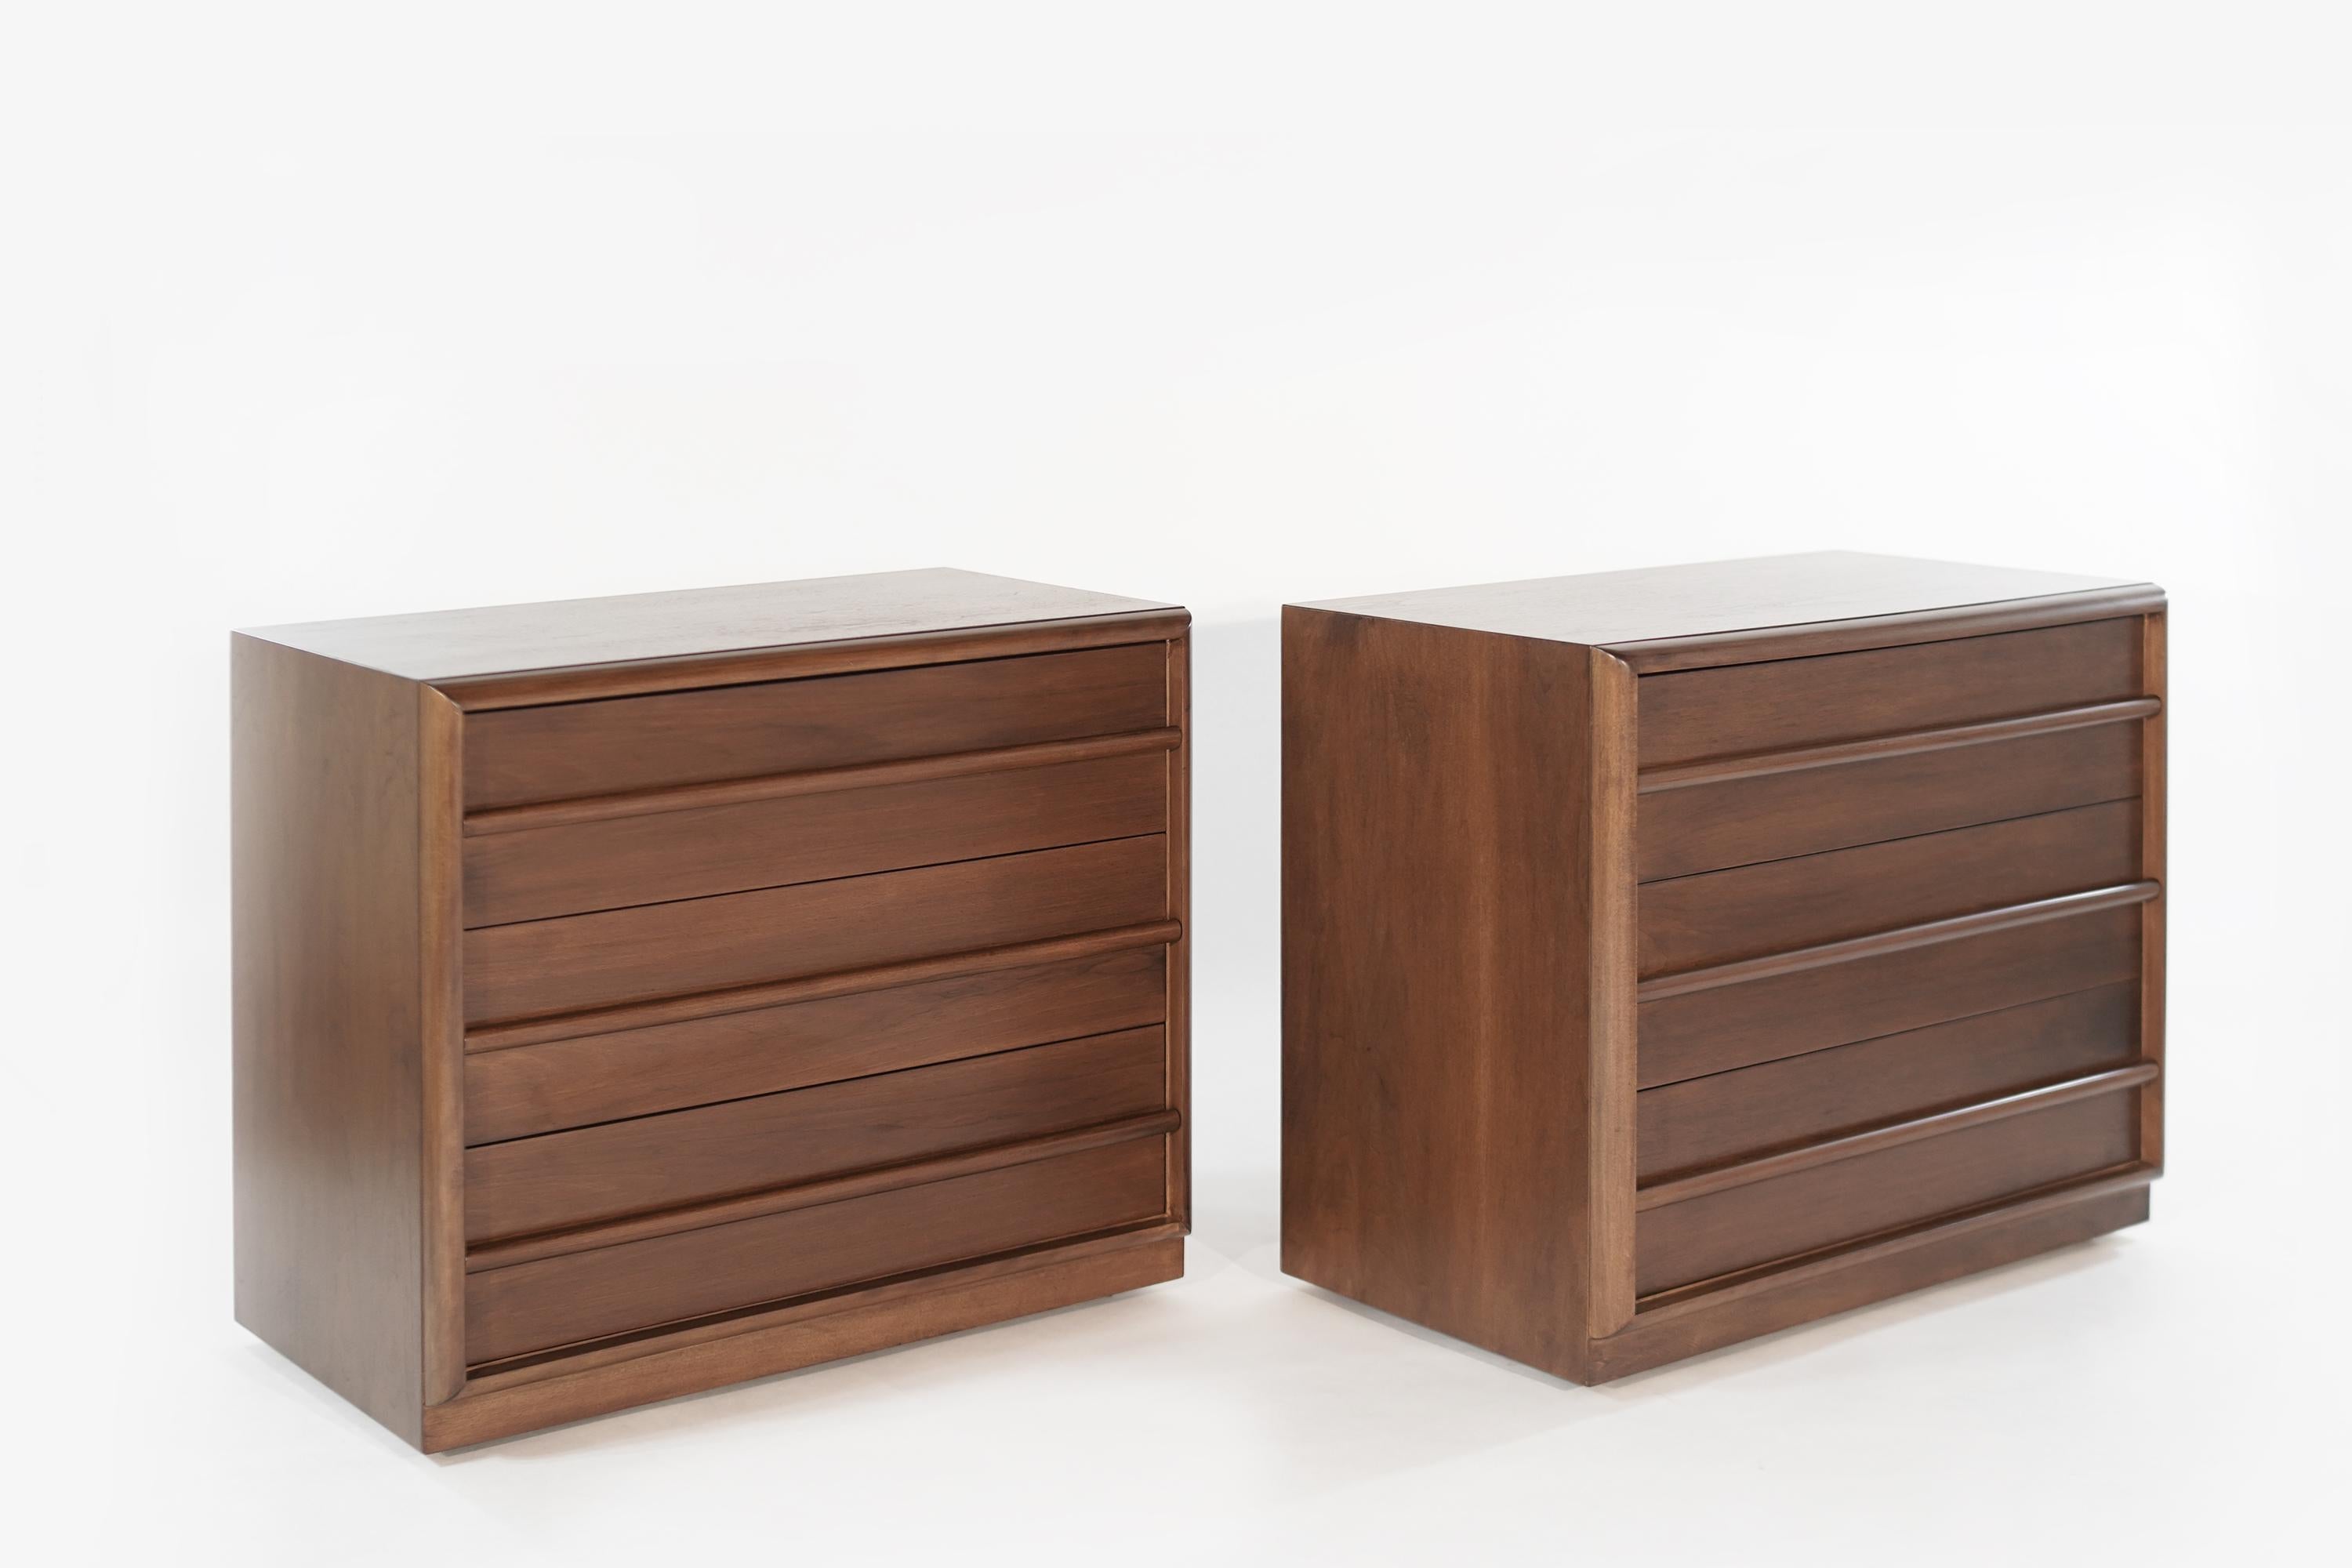 Rarely seen walnut bedside tables designed by T.H. Robsjohn-Gibbings for Widdicomb, circa 1950s. Each chest features three deep drawers offering ample storage space.